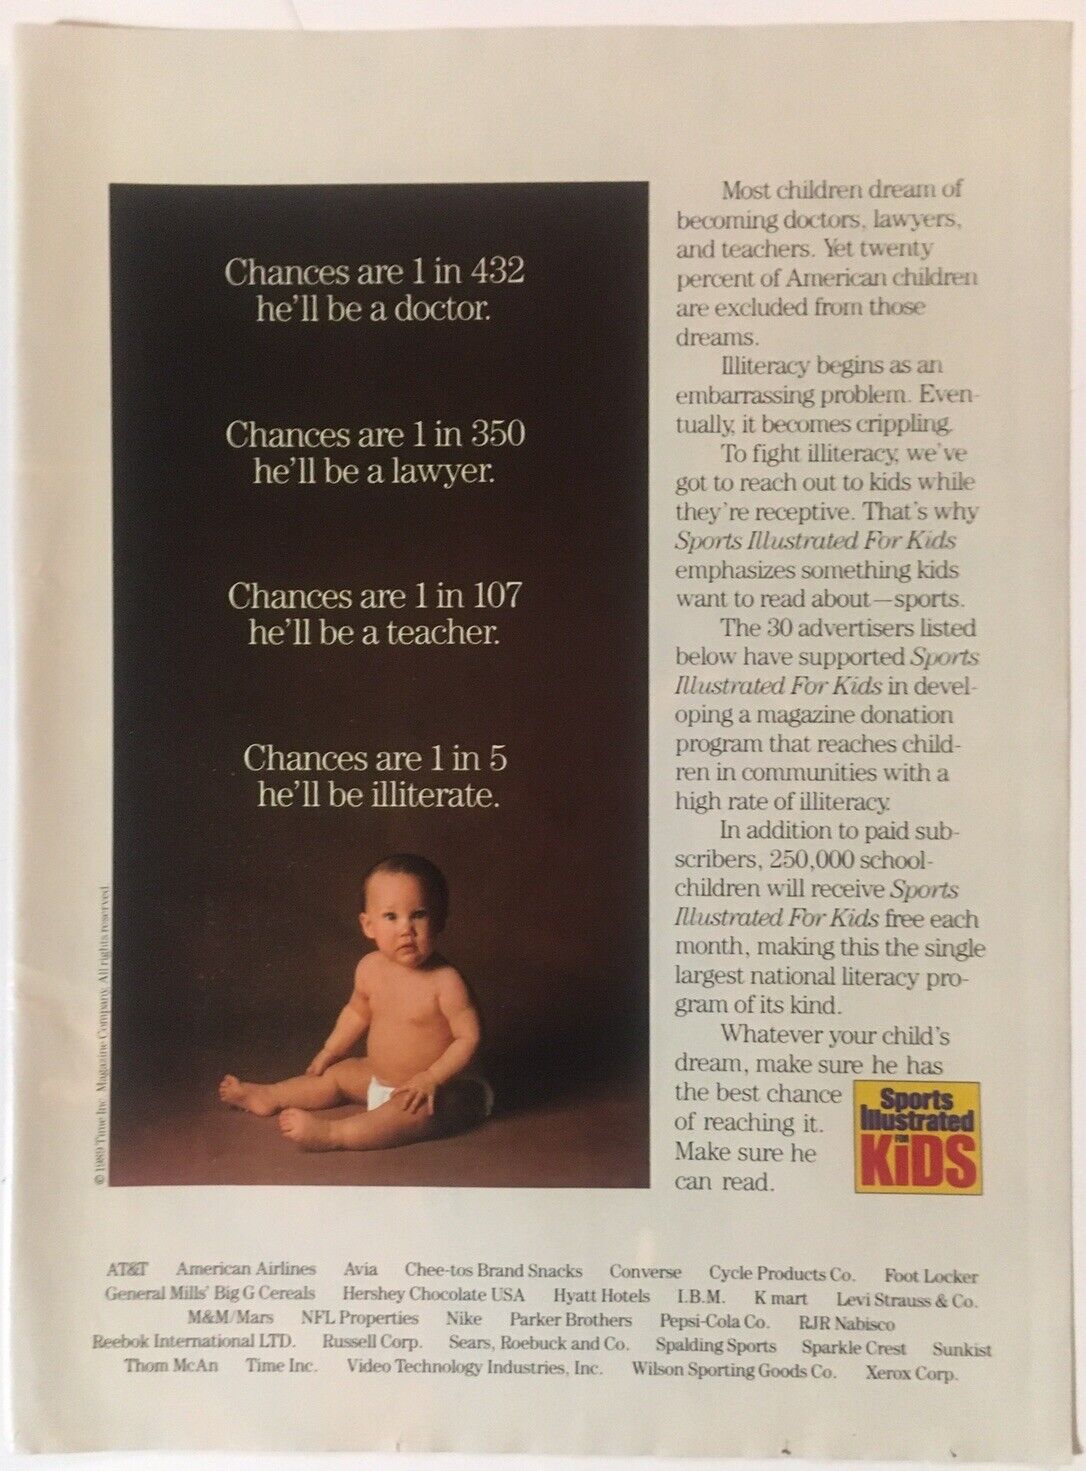 Sports Illustrated for Kids Literacy 1989 Vintage Print Ad 8x11In. Wall Decor